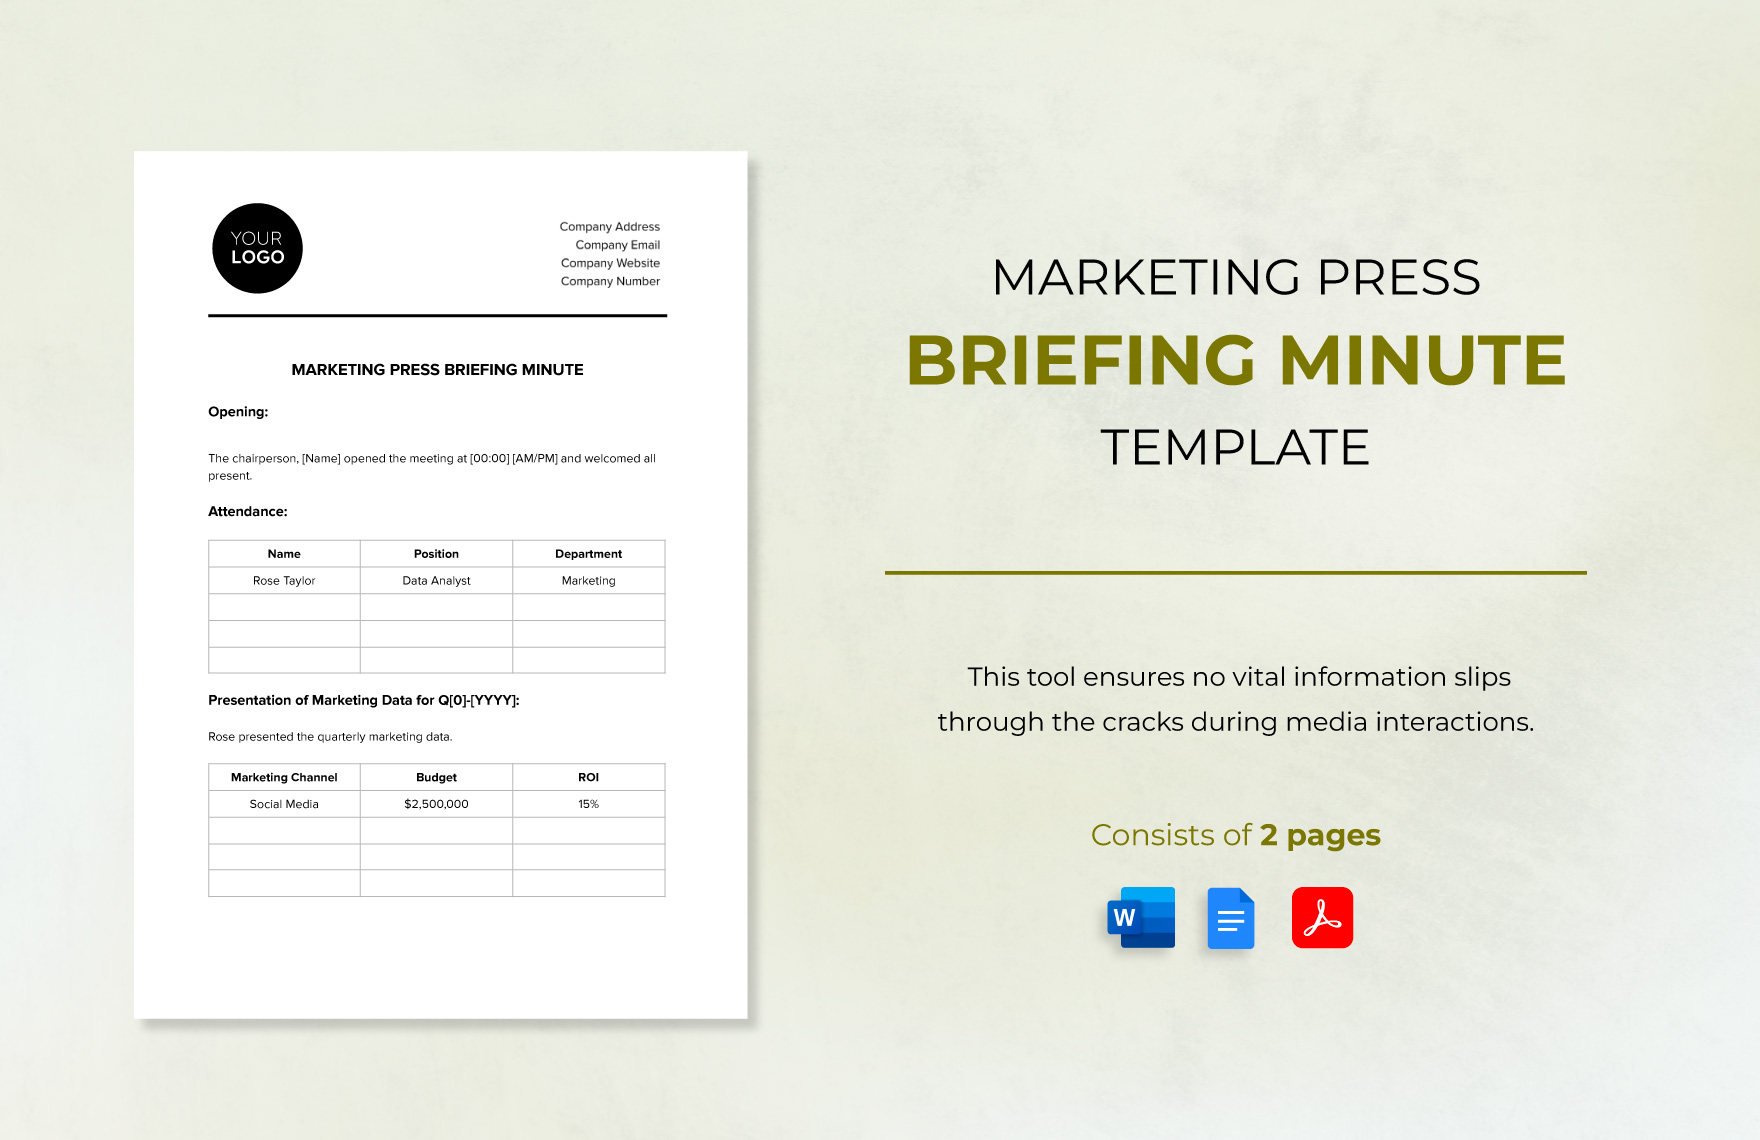 Marketing Press Briefing Minute Template in Word, Google Docs, PDF